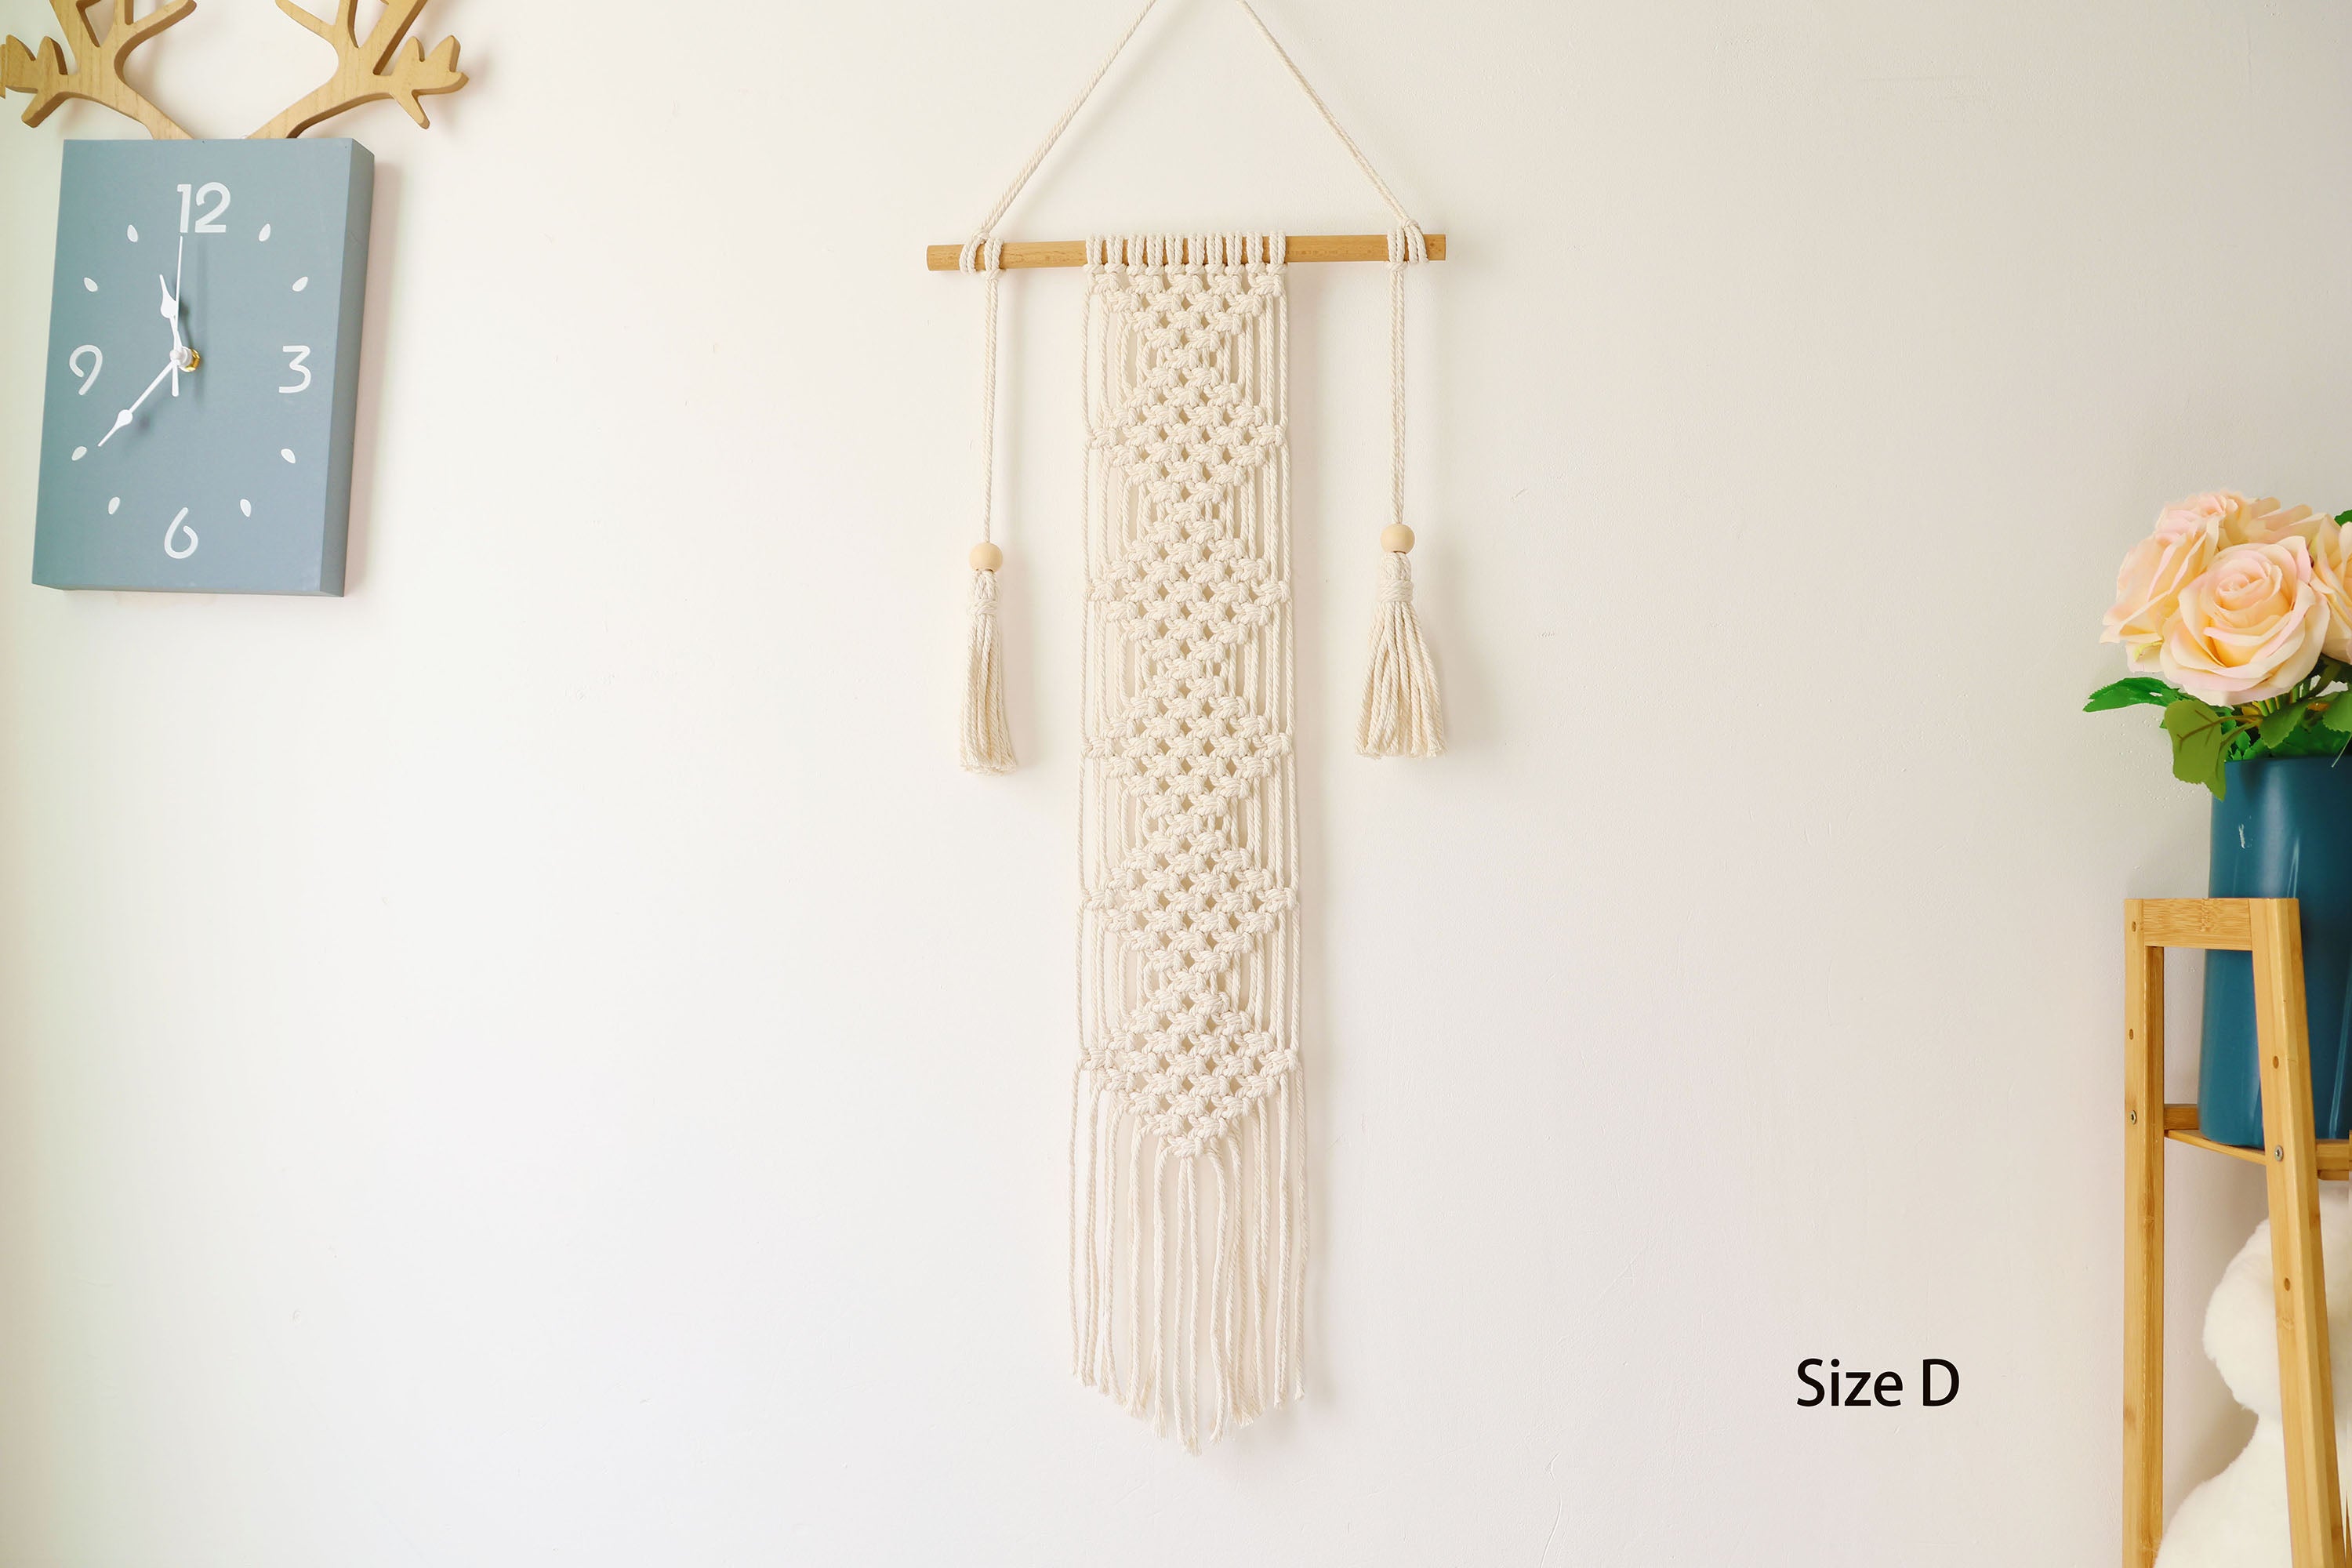 Macrame Wall hanging, Personalized Boho Home Decoration for bedroom/living room/entrance way/headboard/TV background...